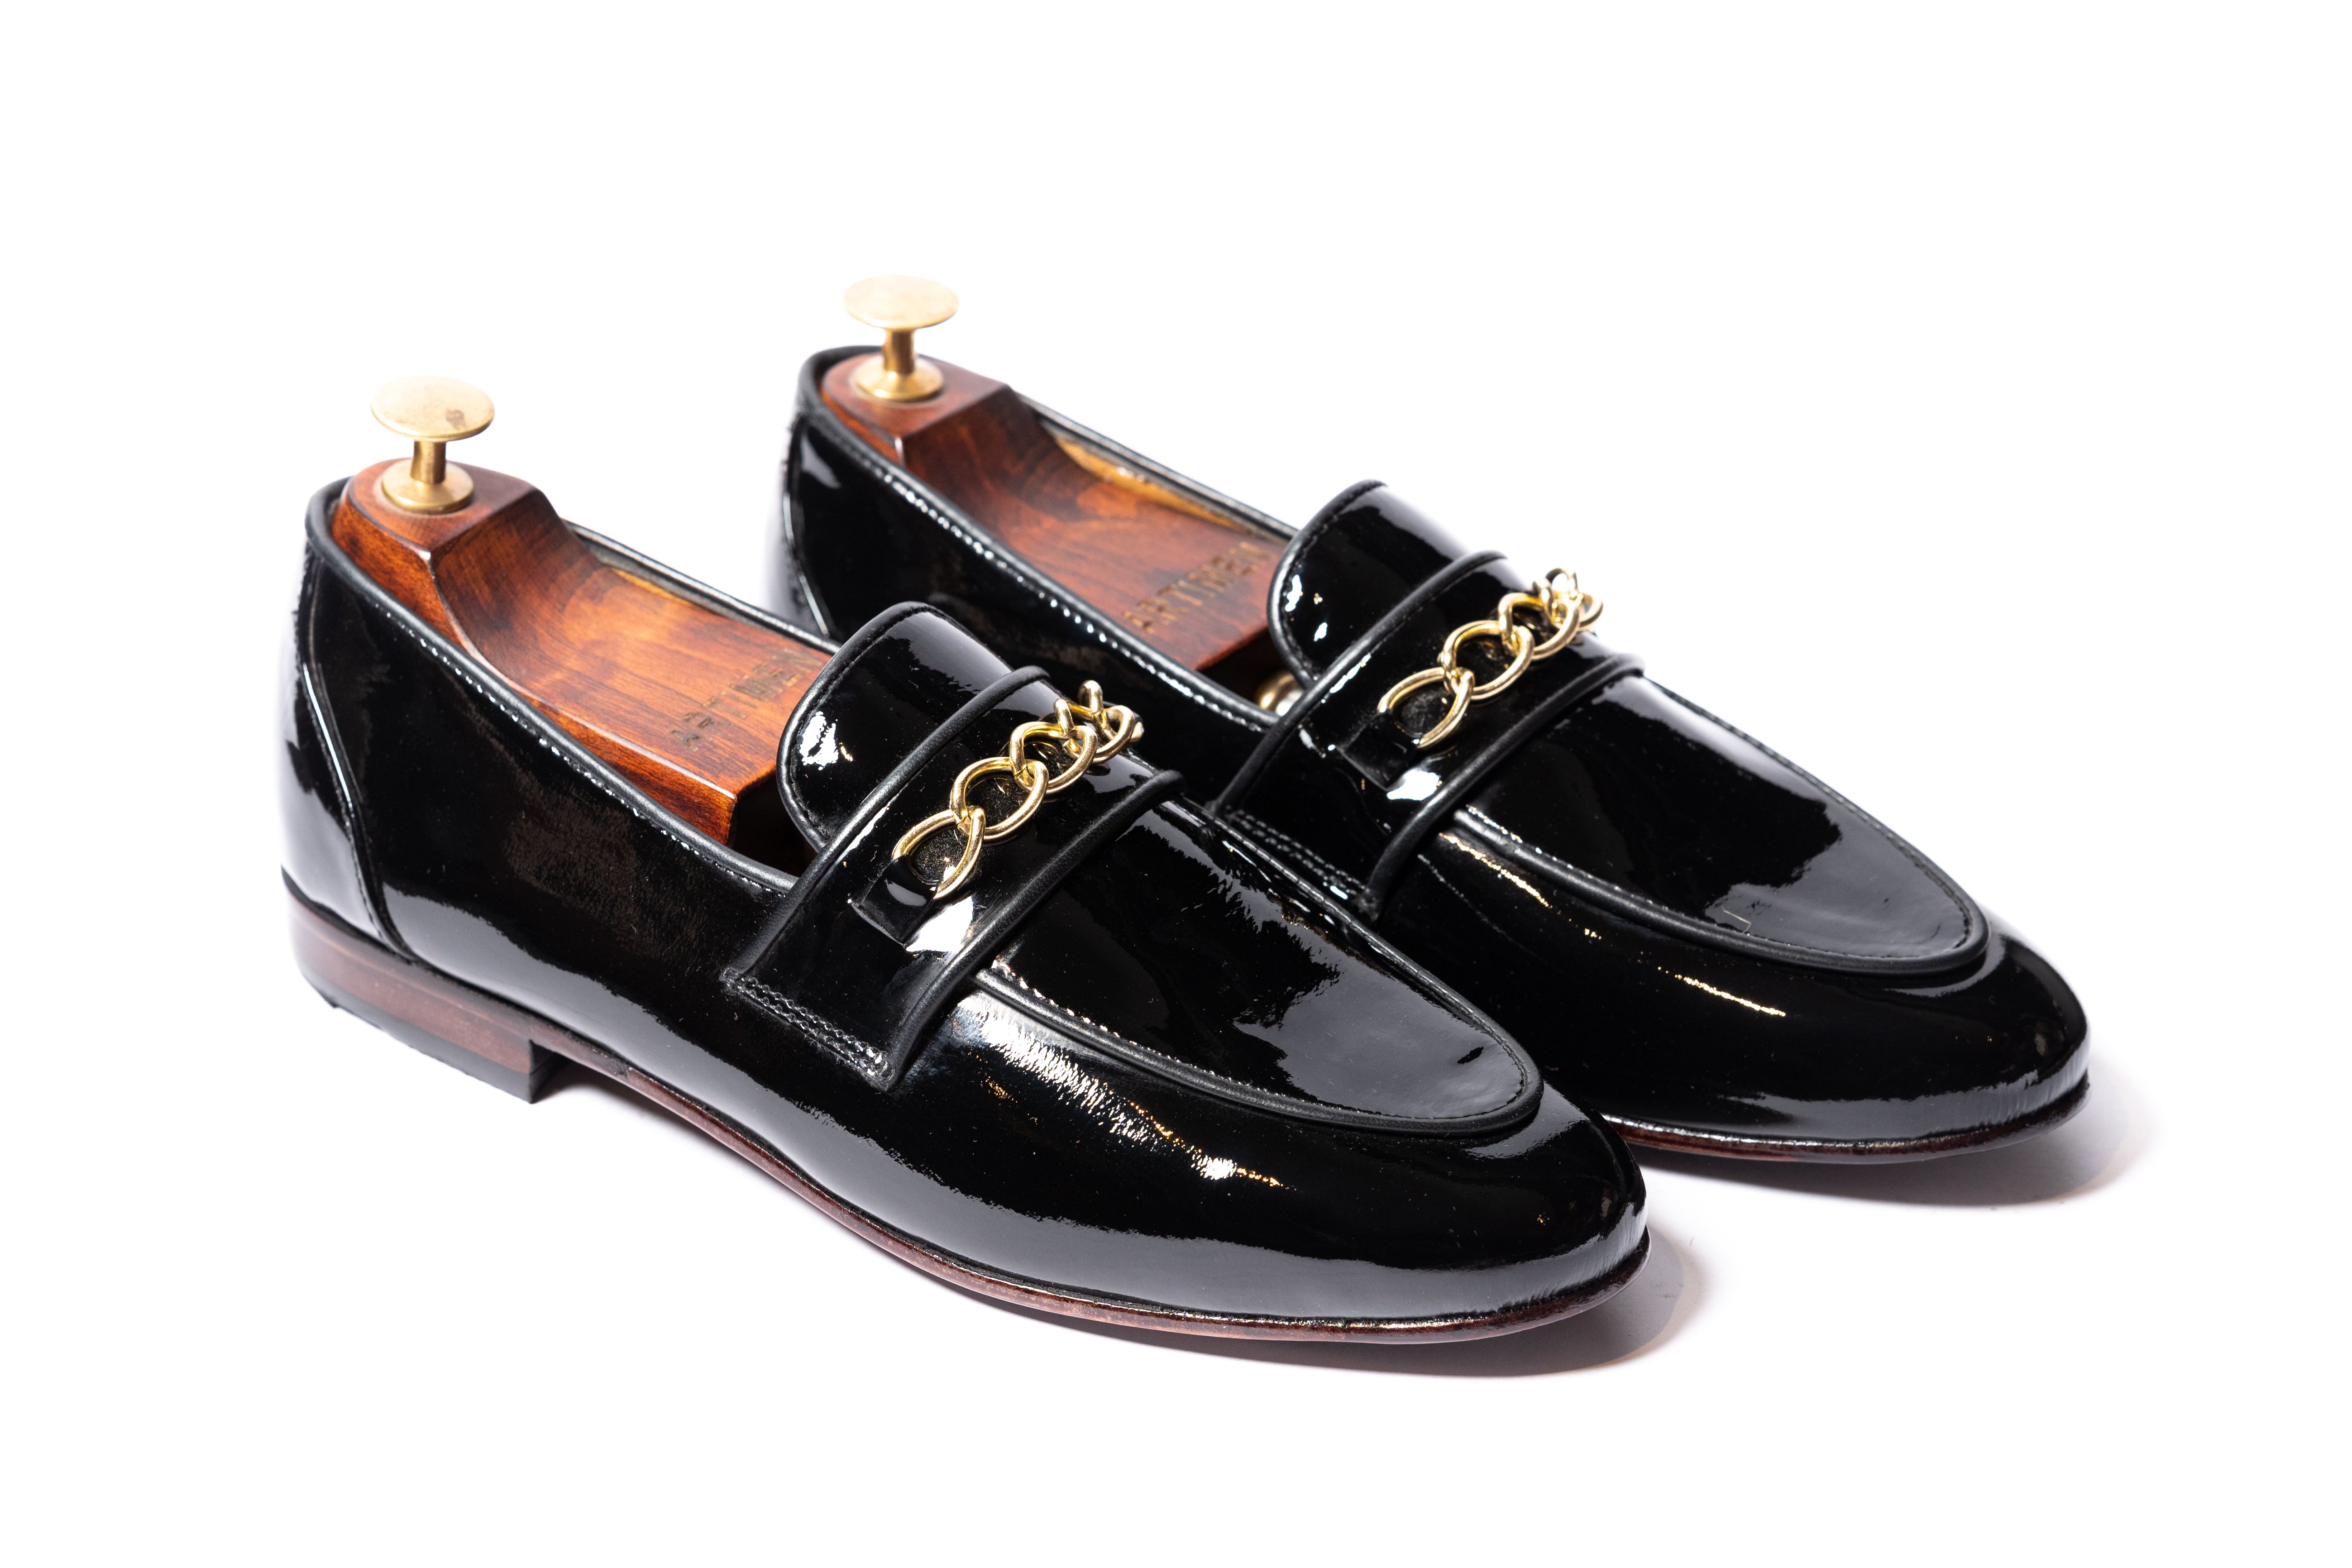 Chained Loafers